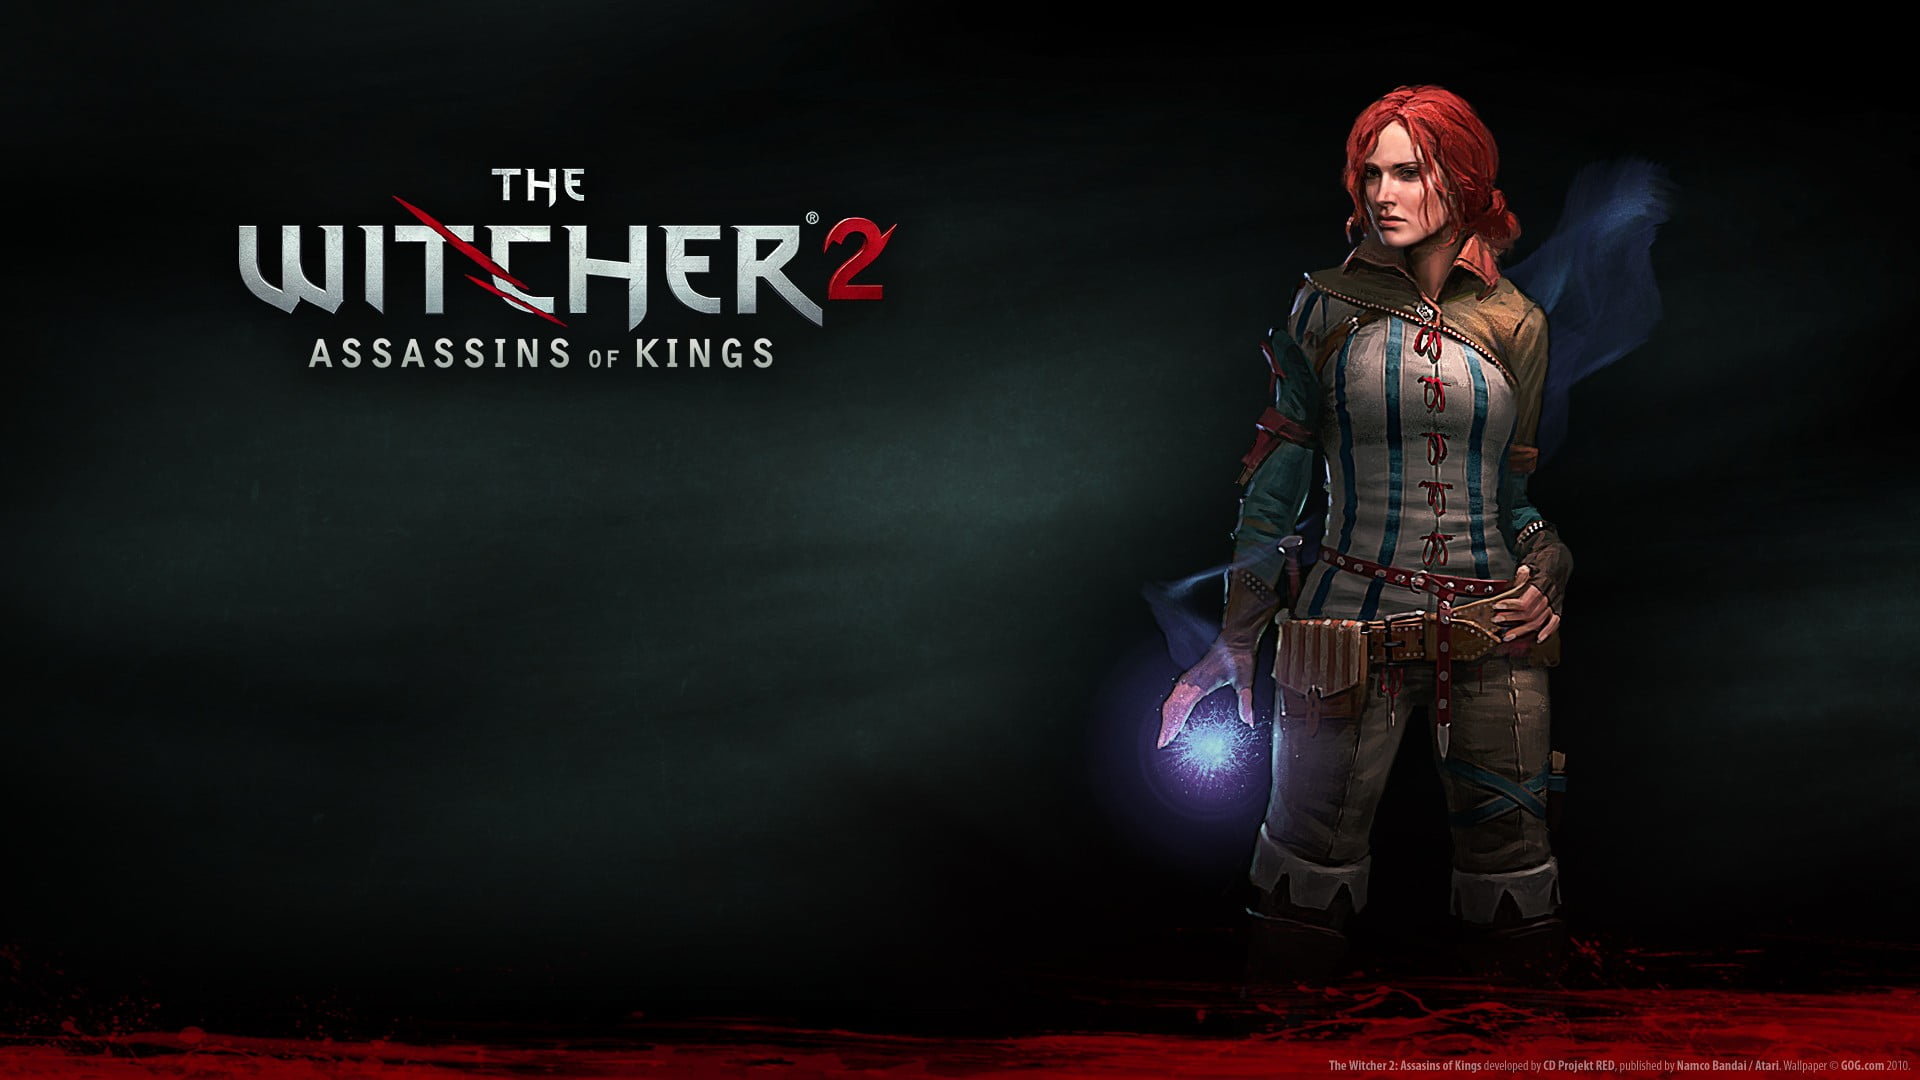 The Witcher 2 Assassins of Kings, Triss Merigold, standing